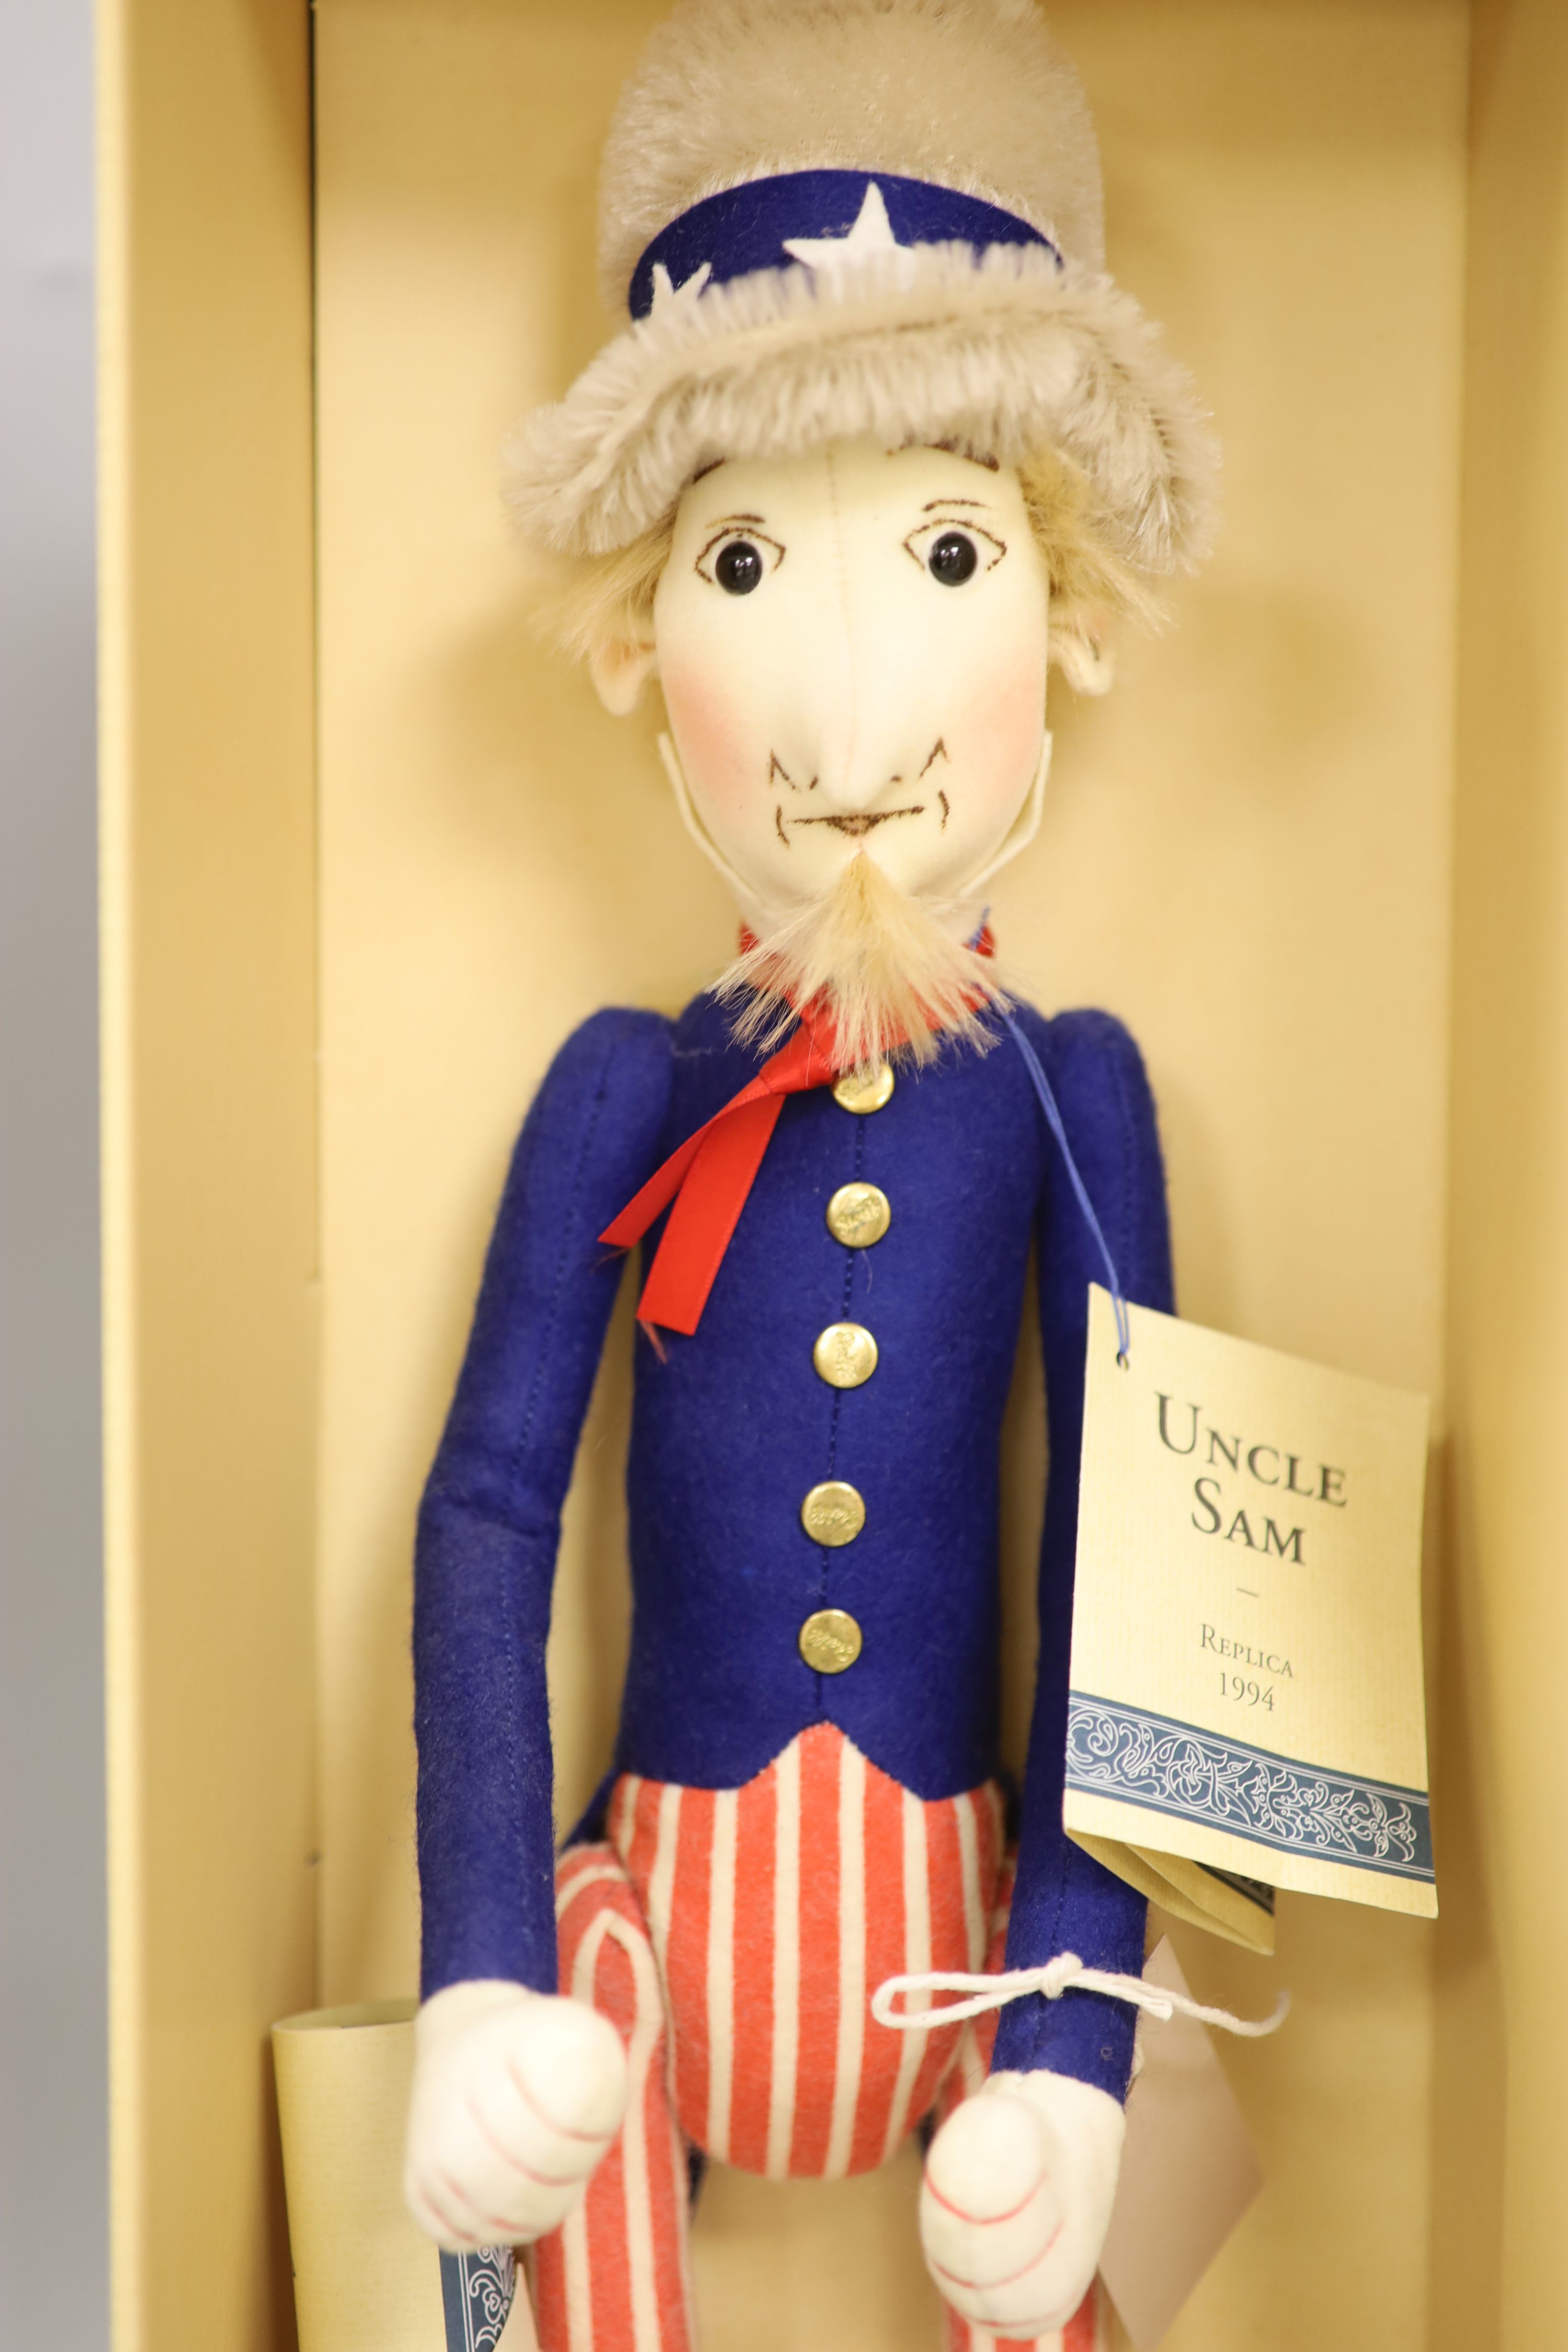 Steiff 'Uncle Sam' doll, box and certificate, Steiff Father Christmas bear limited edition, box - Image 2 of 2